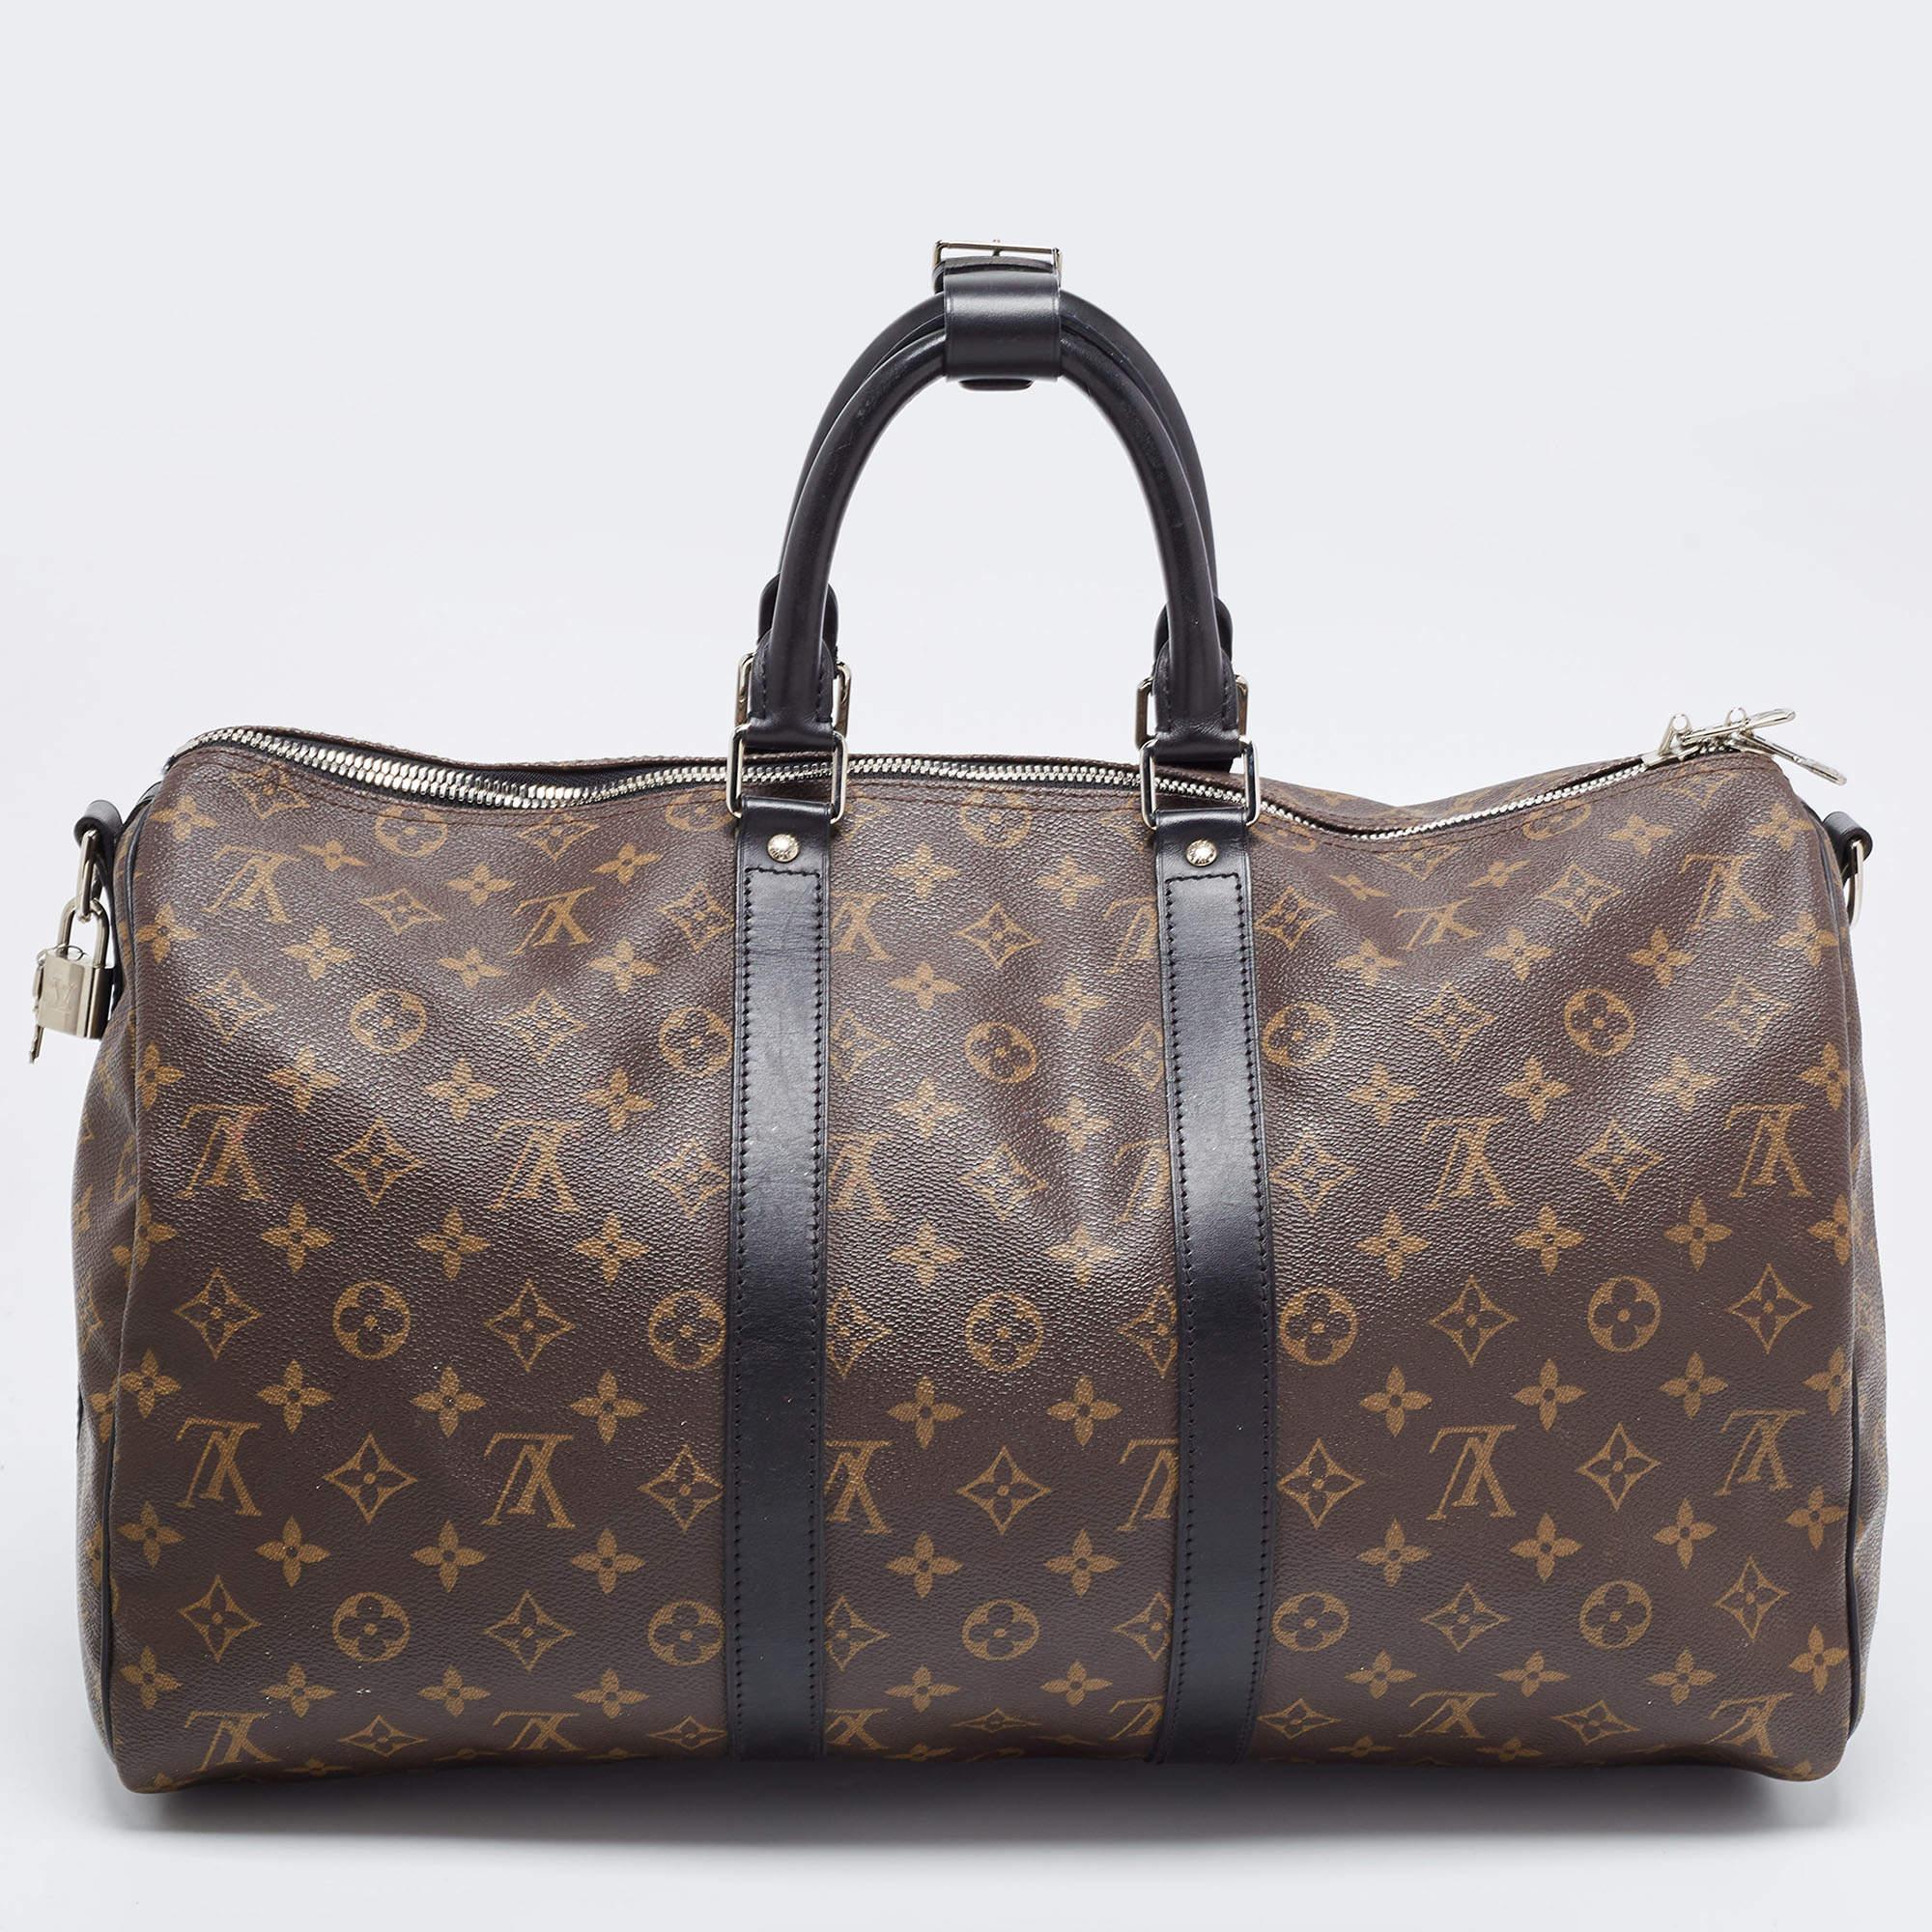 Perfect for conveniently housing your essentials in one place, this Louis Vuitton Keepall is a worthy investment. It has notable details and offers a look of luxury.

